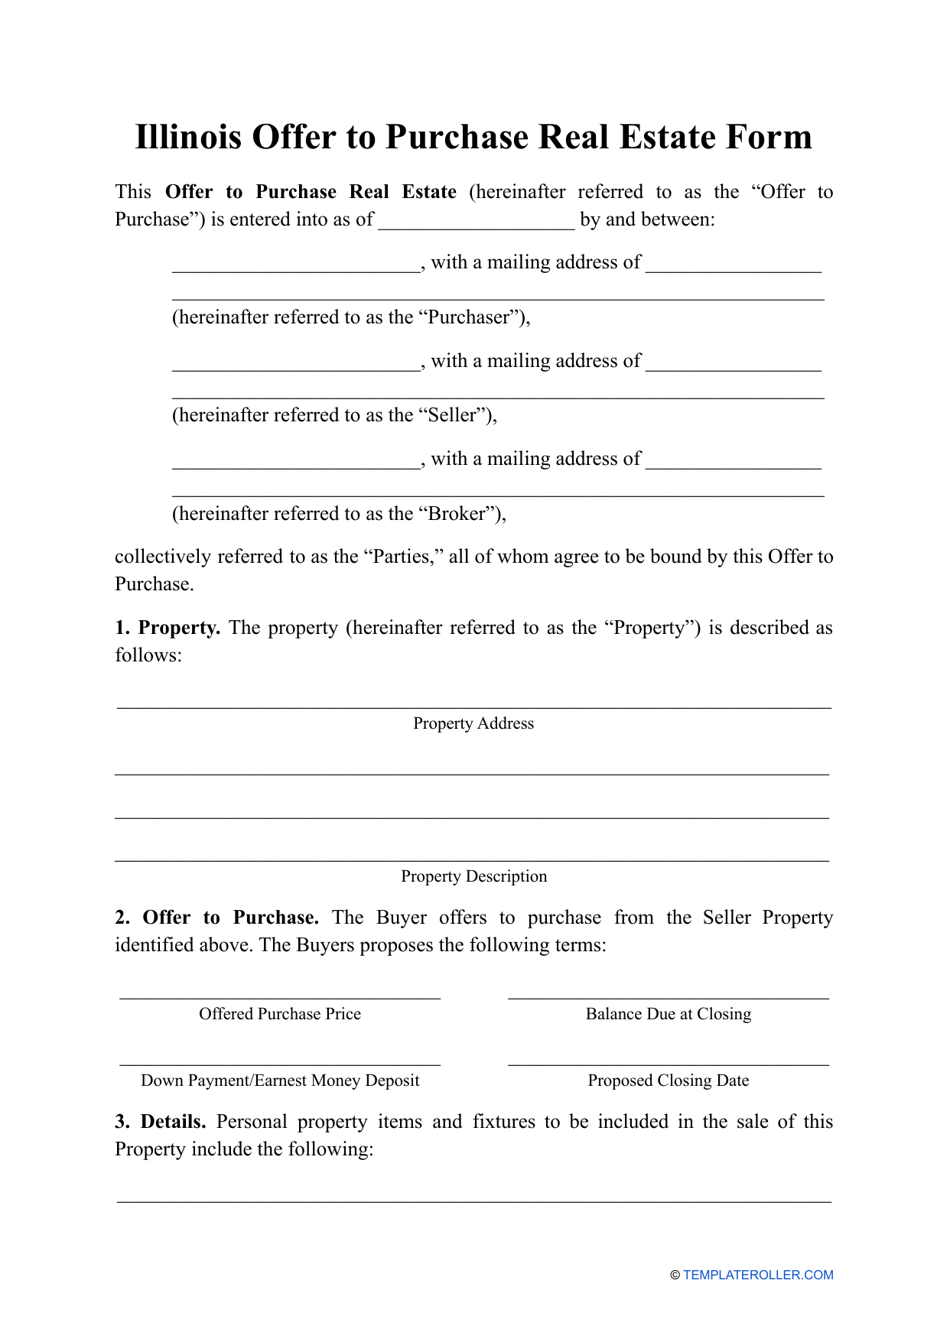 Offer to Purchase Real Estate Form - Illinois, Page 1